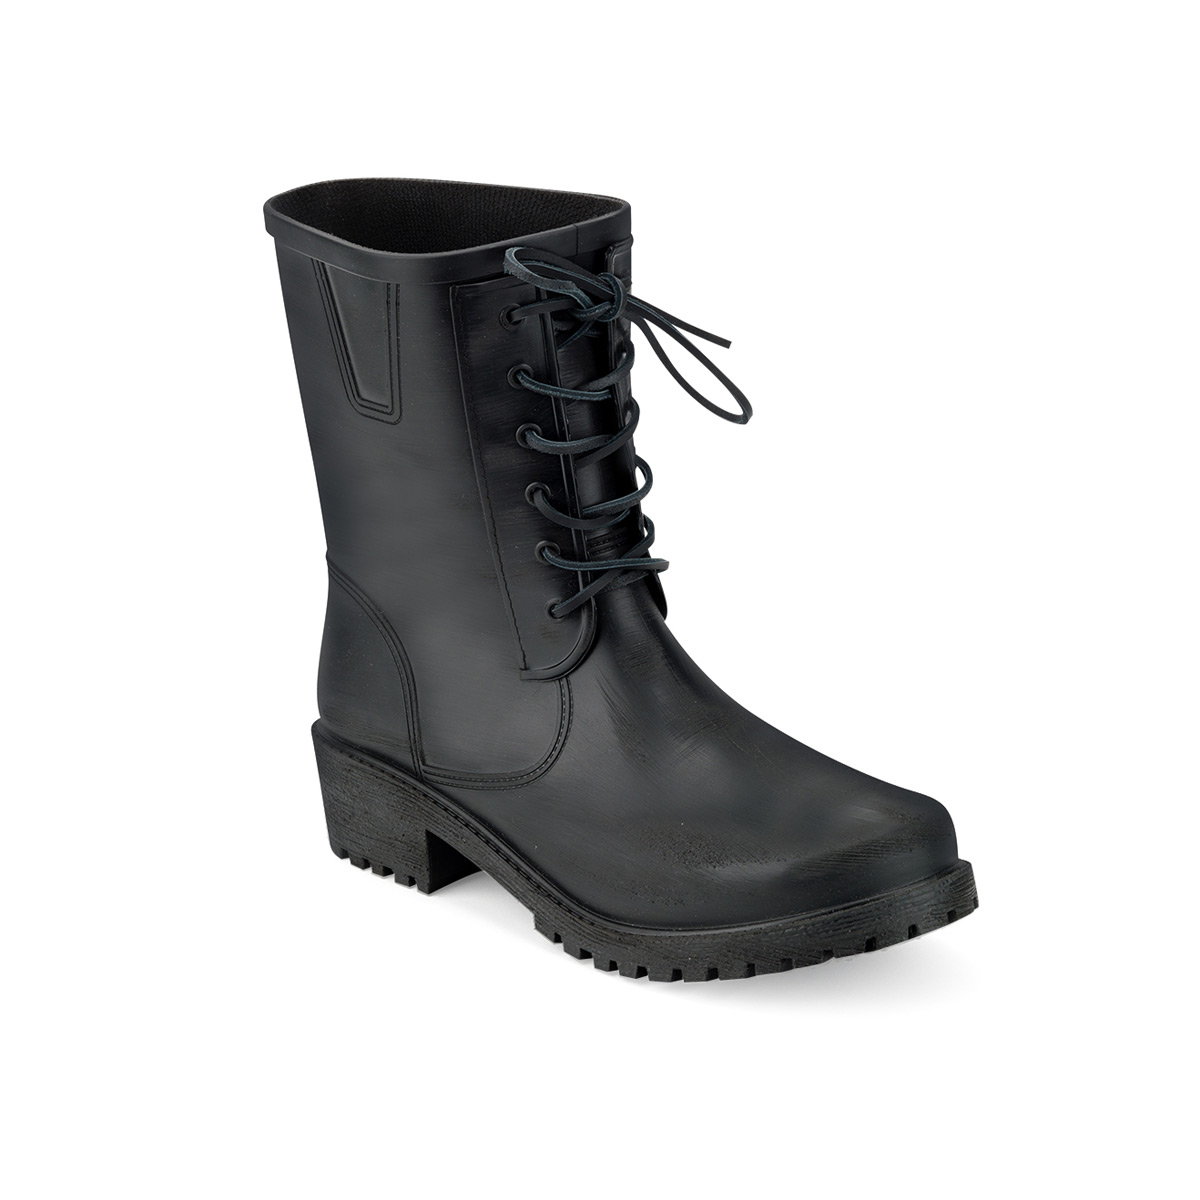 Brushed pvc biker boot with laces